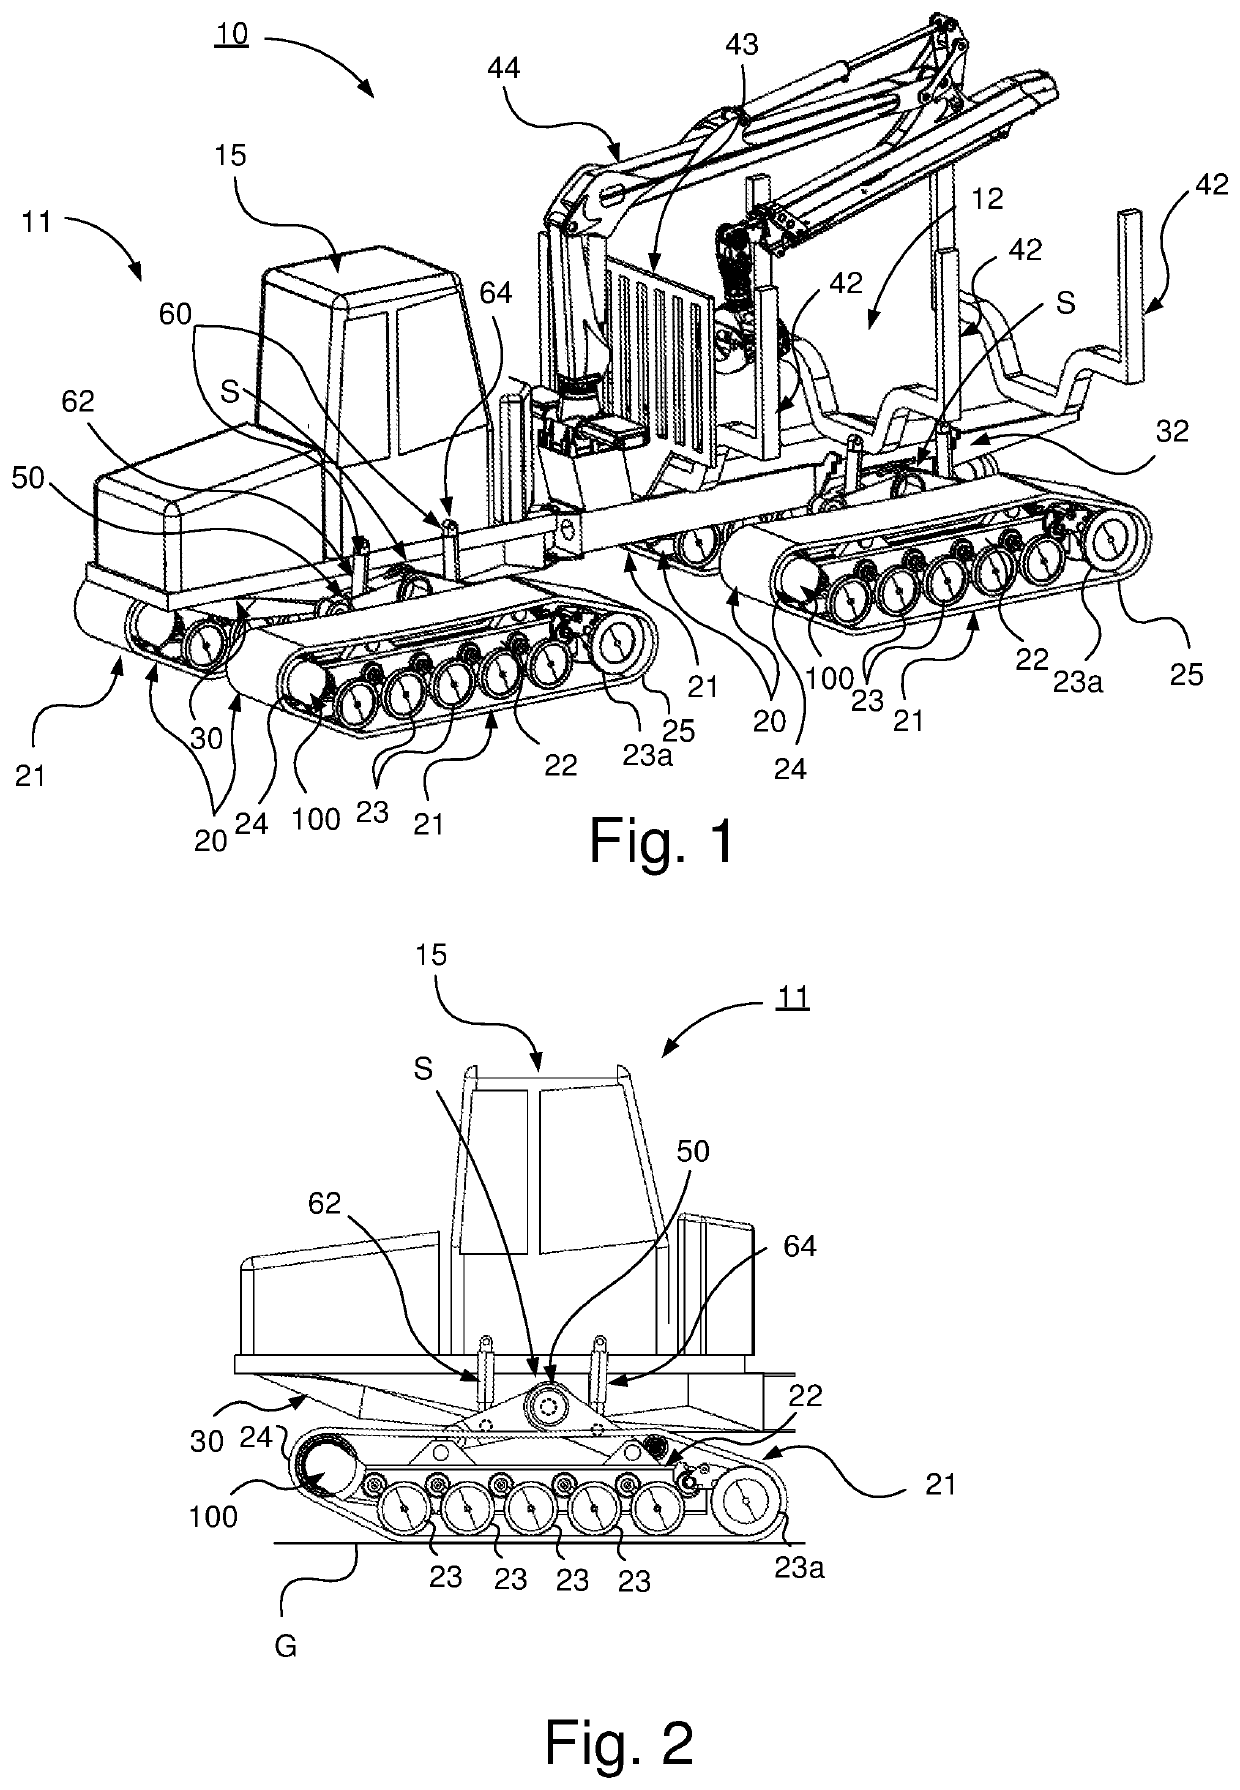 Tracked vehicle having motor coaxially arranged with drive wheel